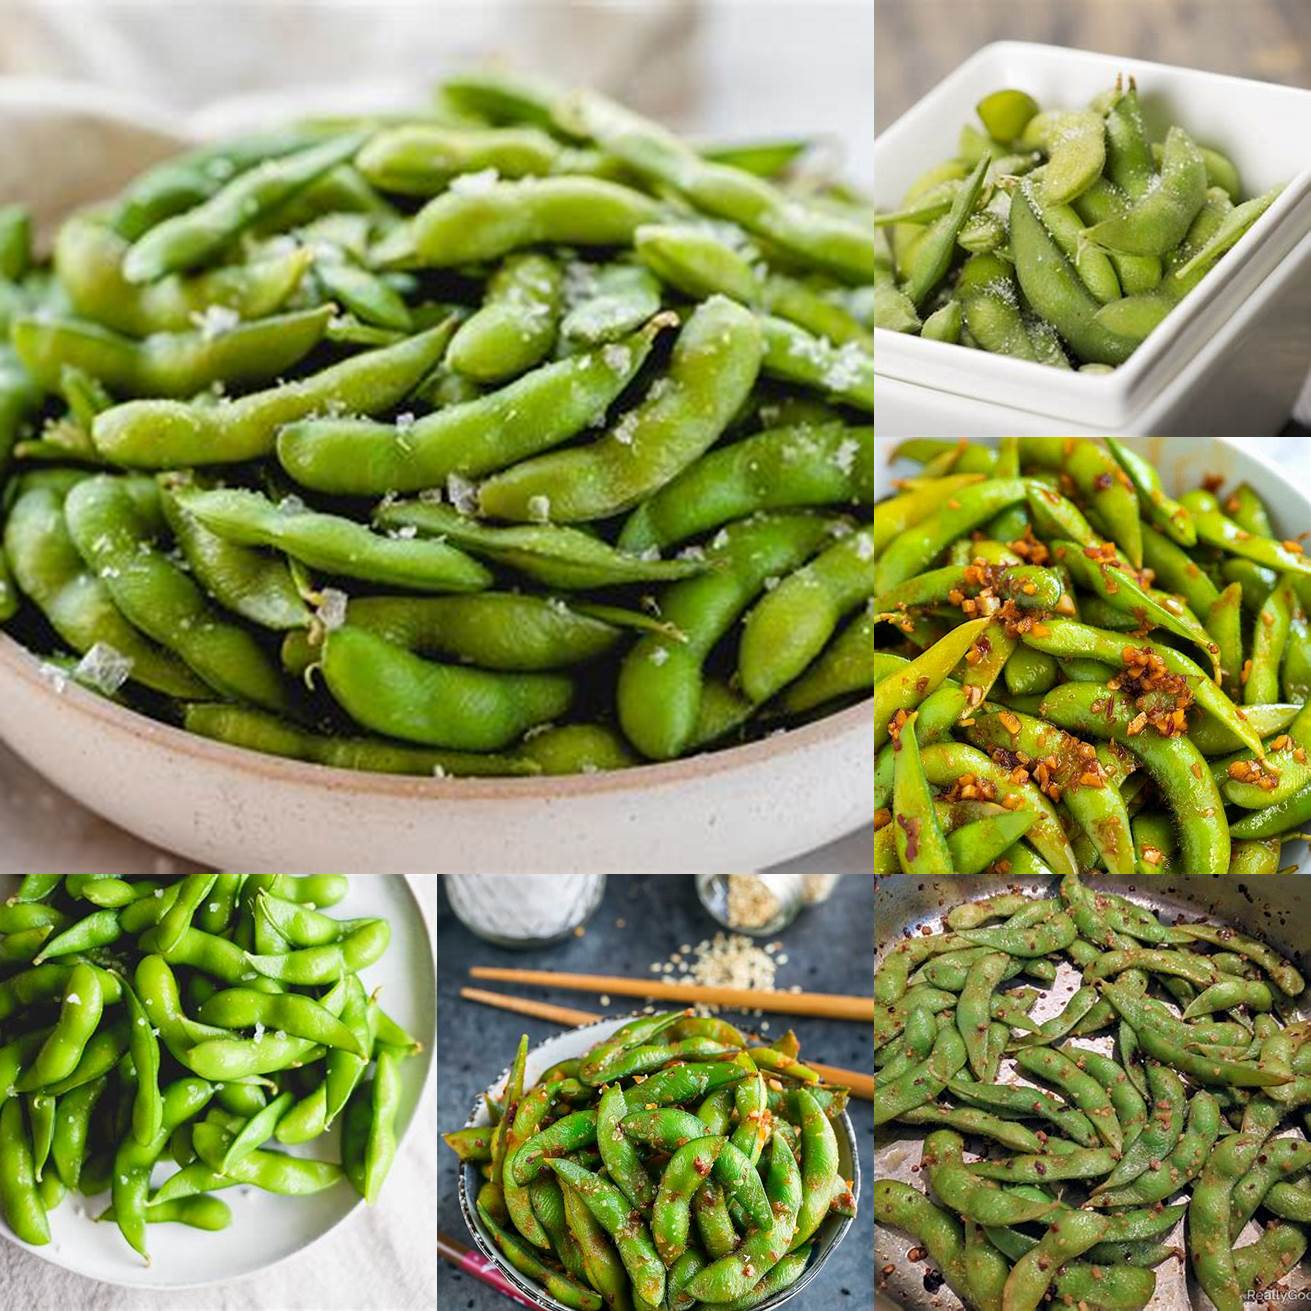 Edamame should be cooked and unsalted